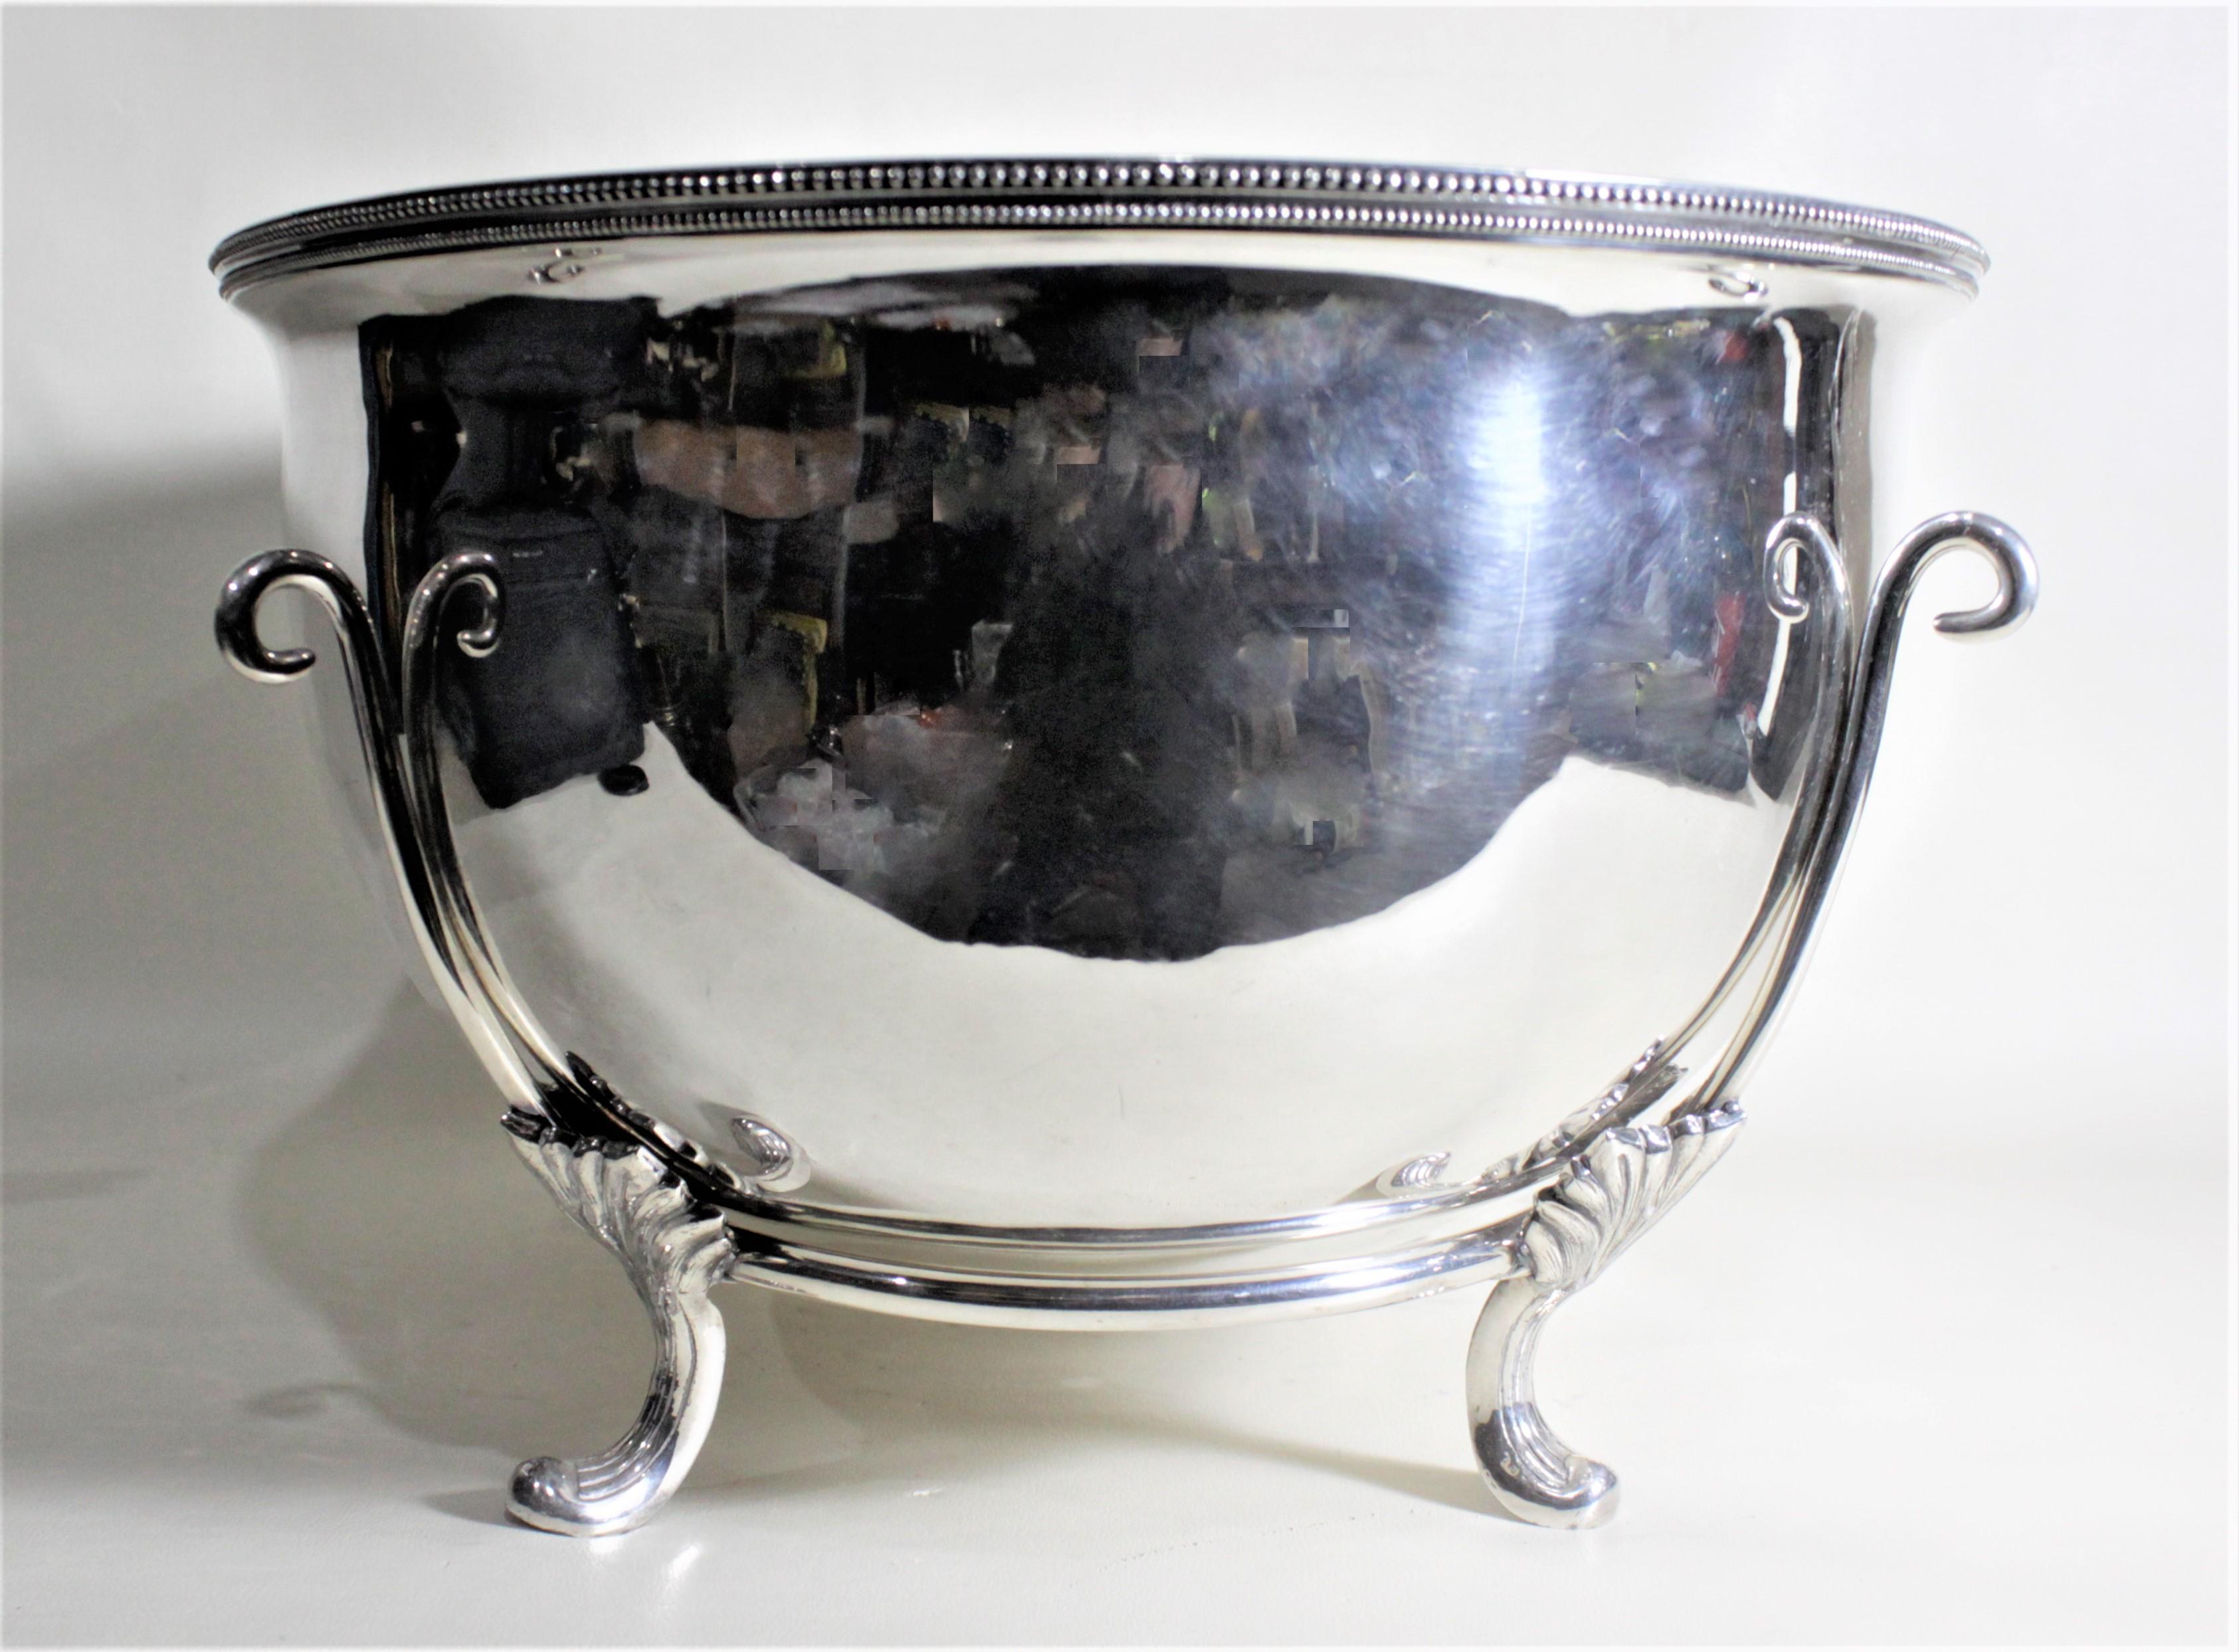 Victorian Antique Silver Plated Converted Meat Dome Ice Trough, Wine Cooler or Centerpiece